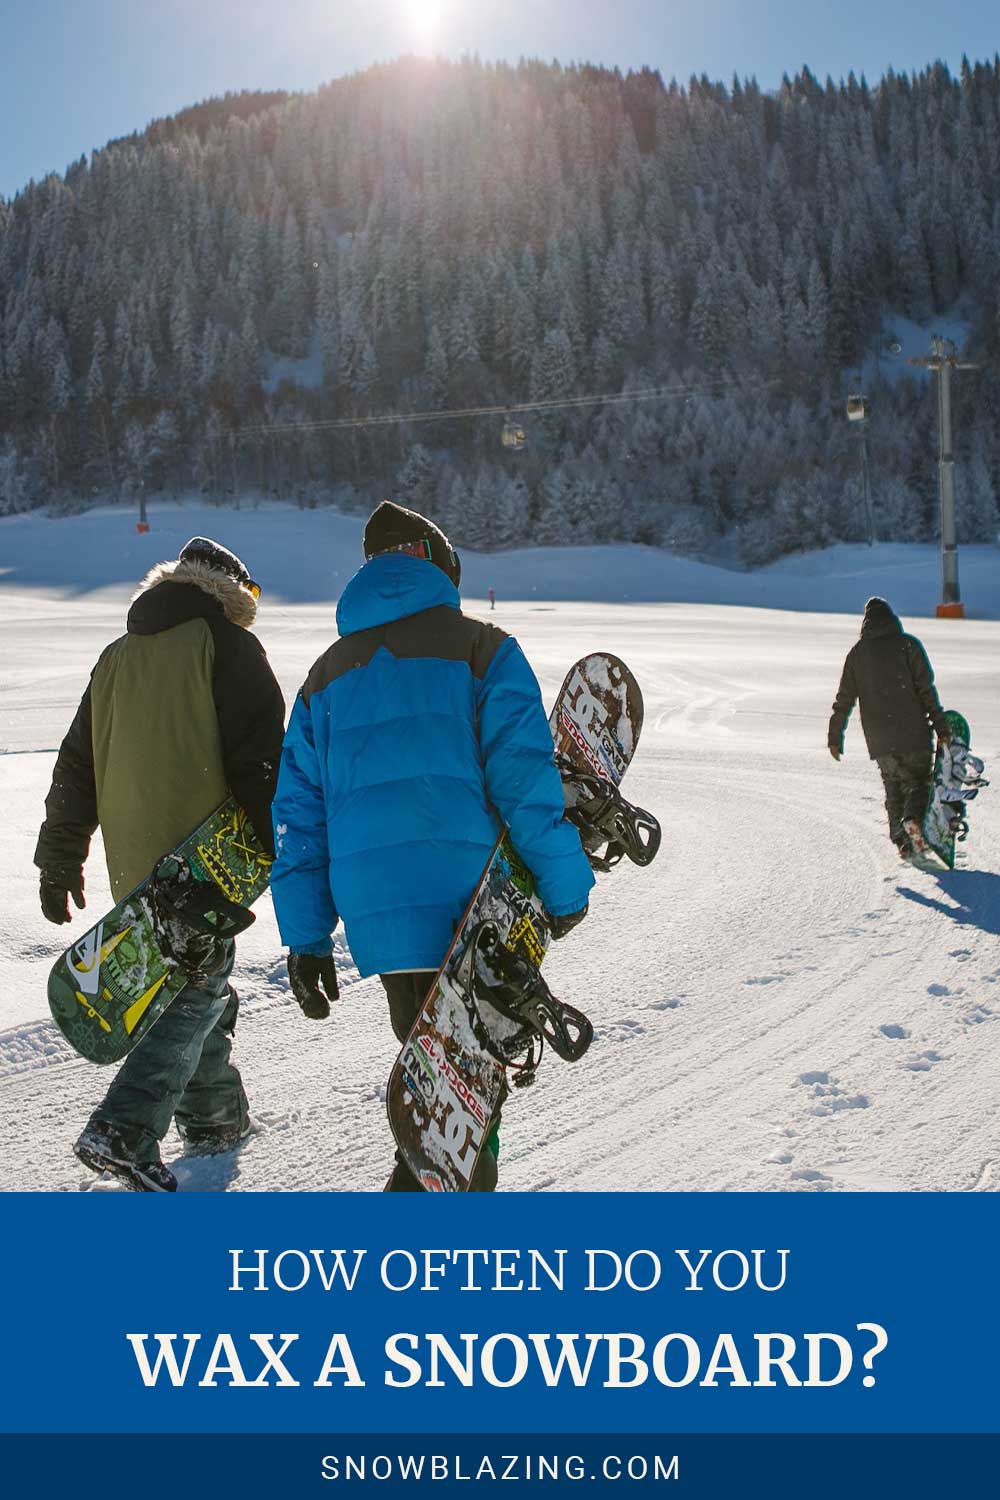 People walking on snow with snowboards in hand - How Often Do You Wax A Snowboard?